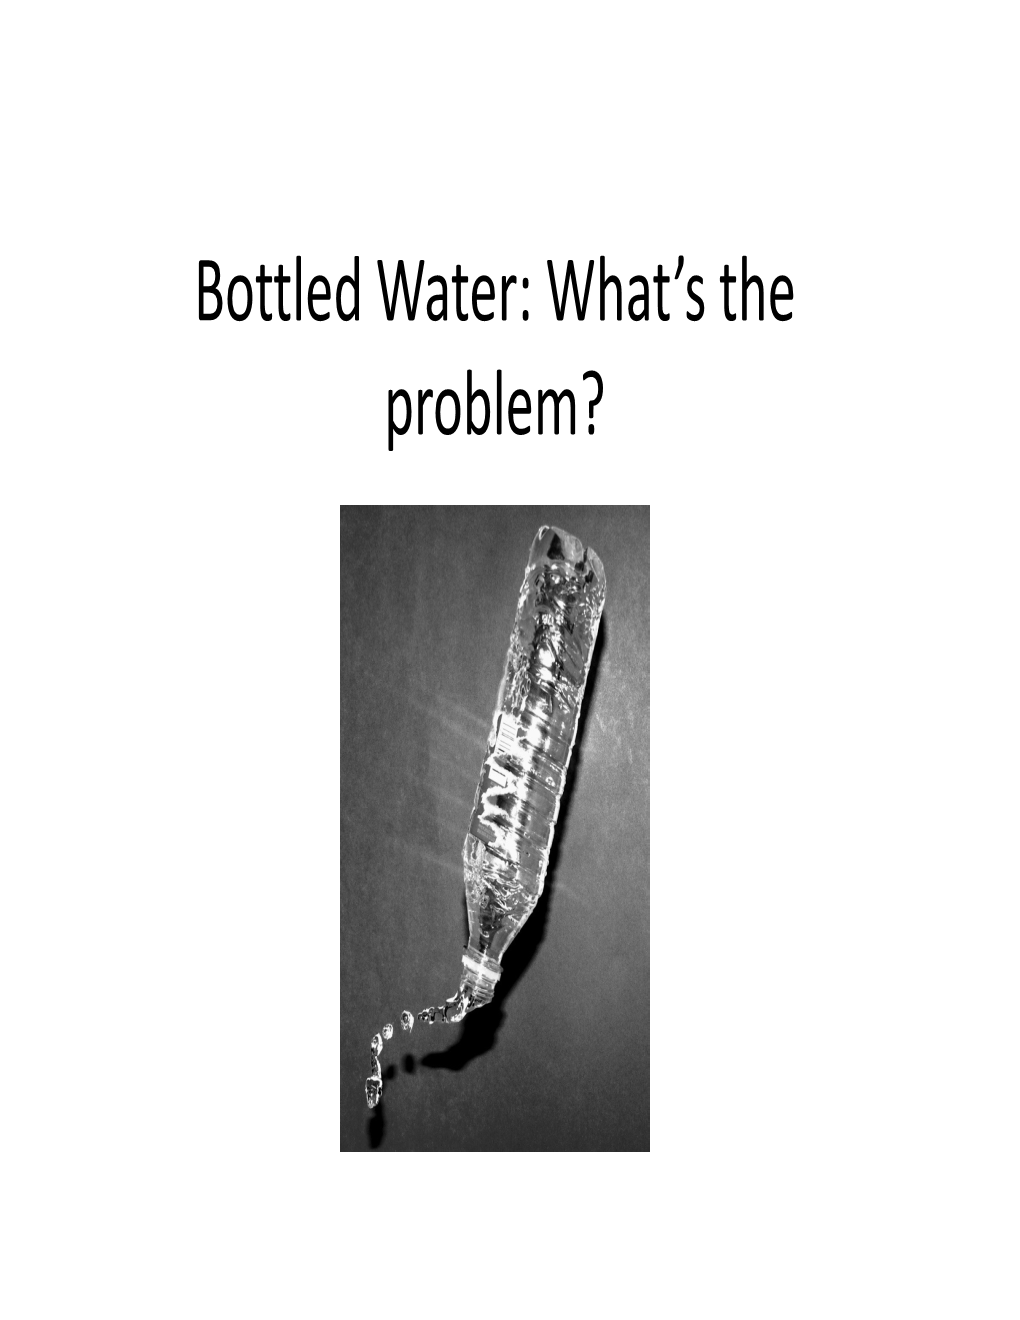 Bottled Water: What's the Problem?